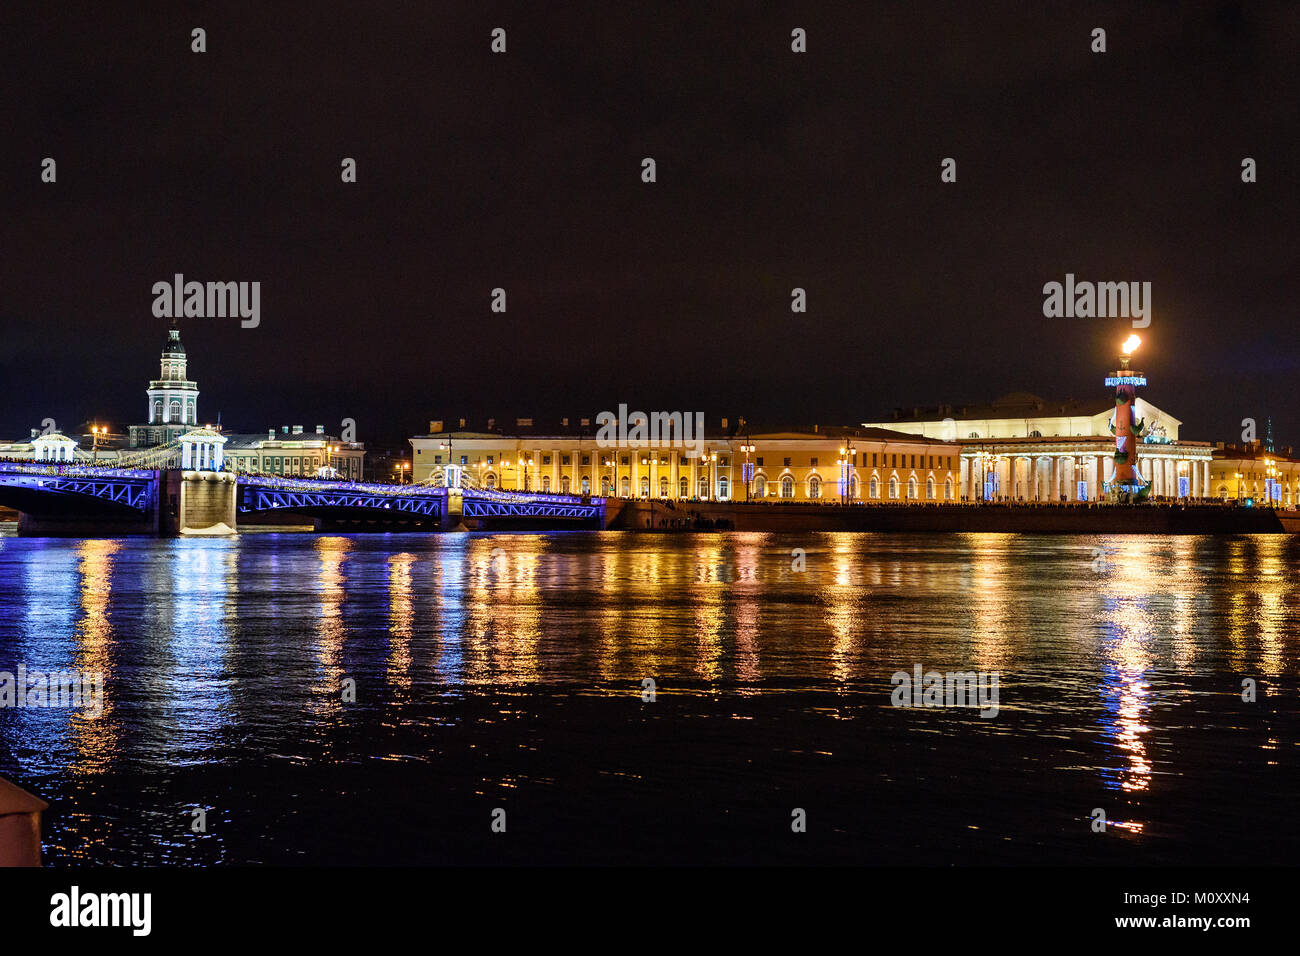 Palace Bridge and Vasilyevsky island Spit Strelka with Rostral columns at night. New Year and Christmas illumunated. Saint Petersburg, Russia Stock Photo